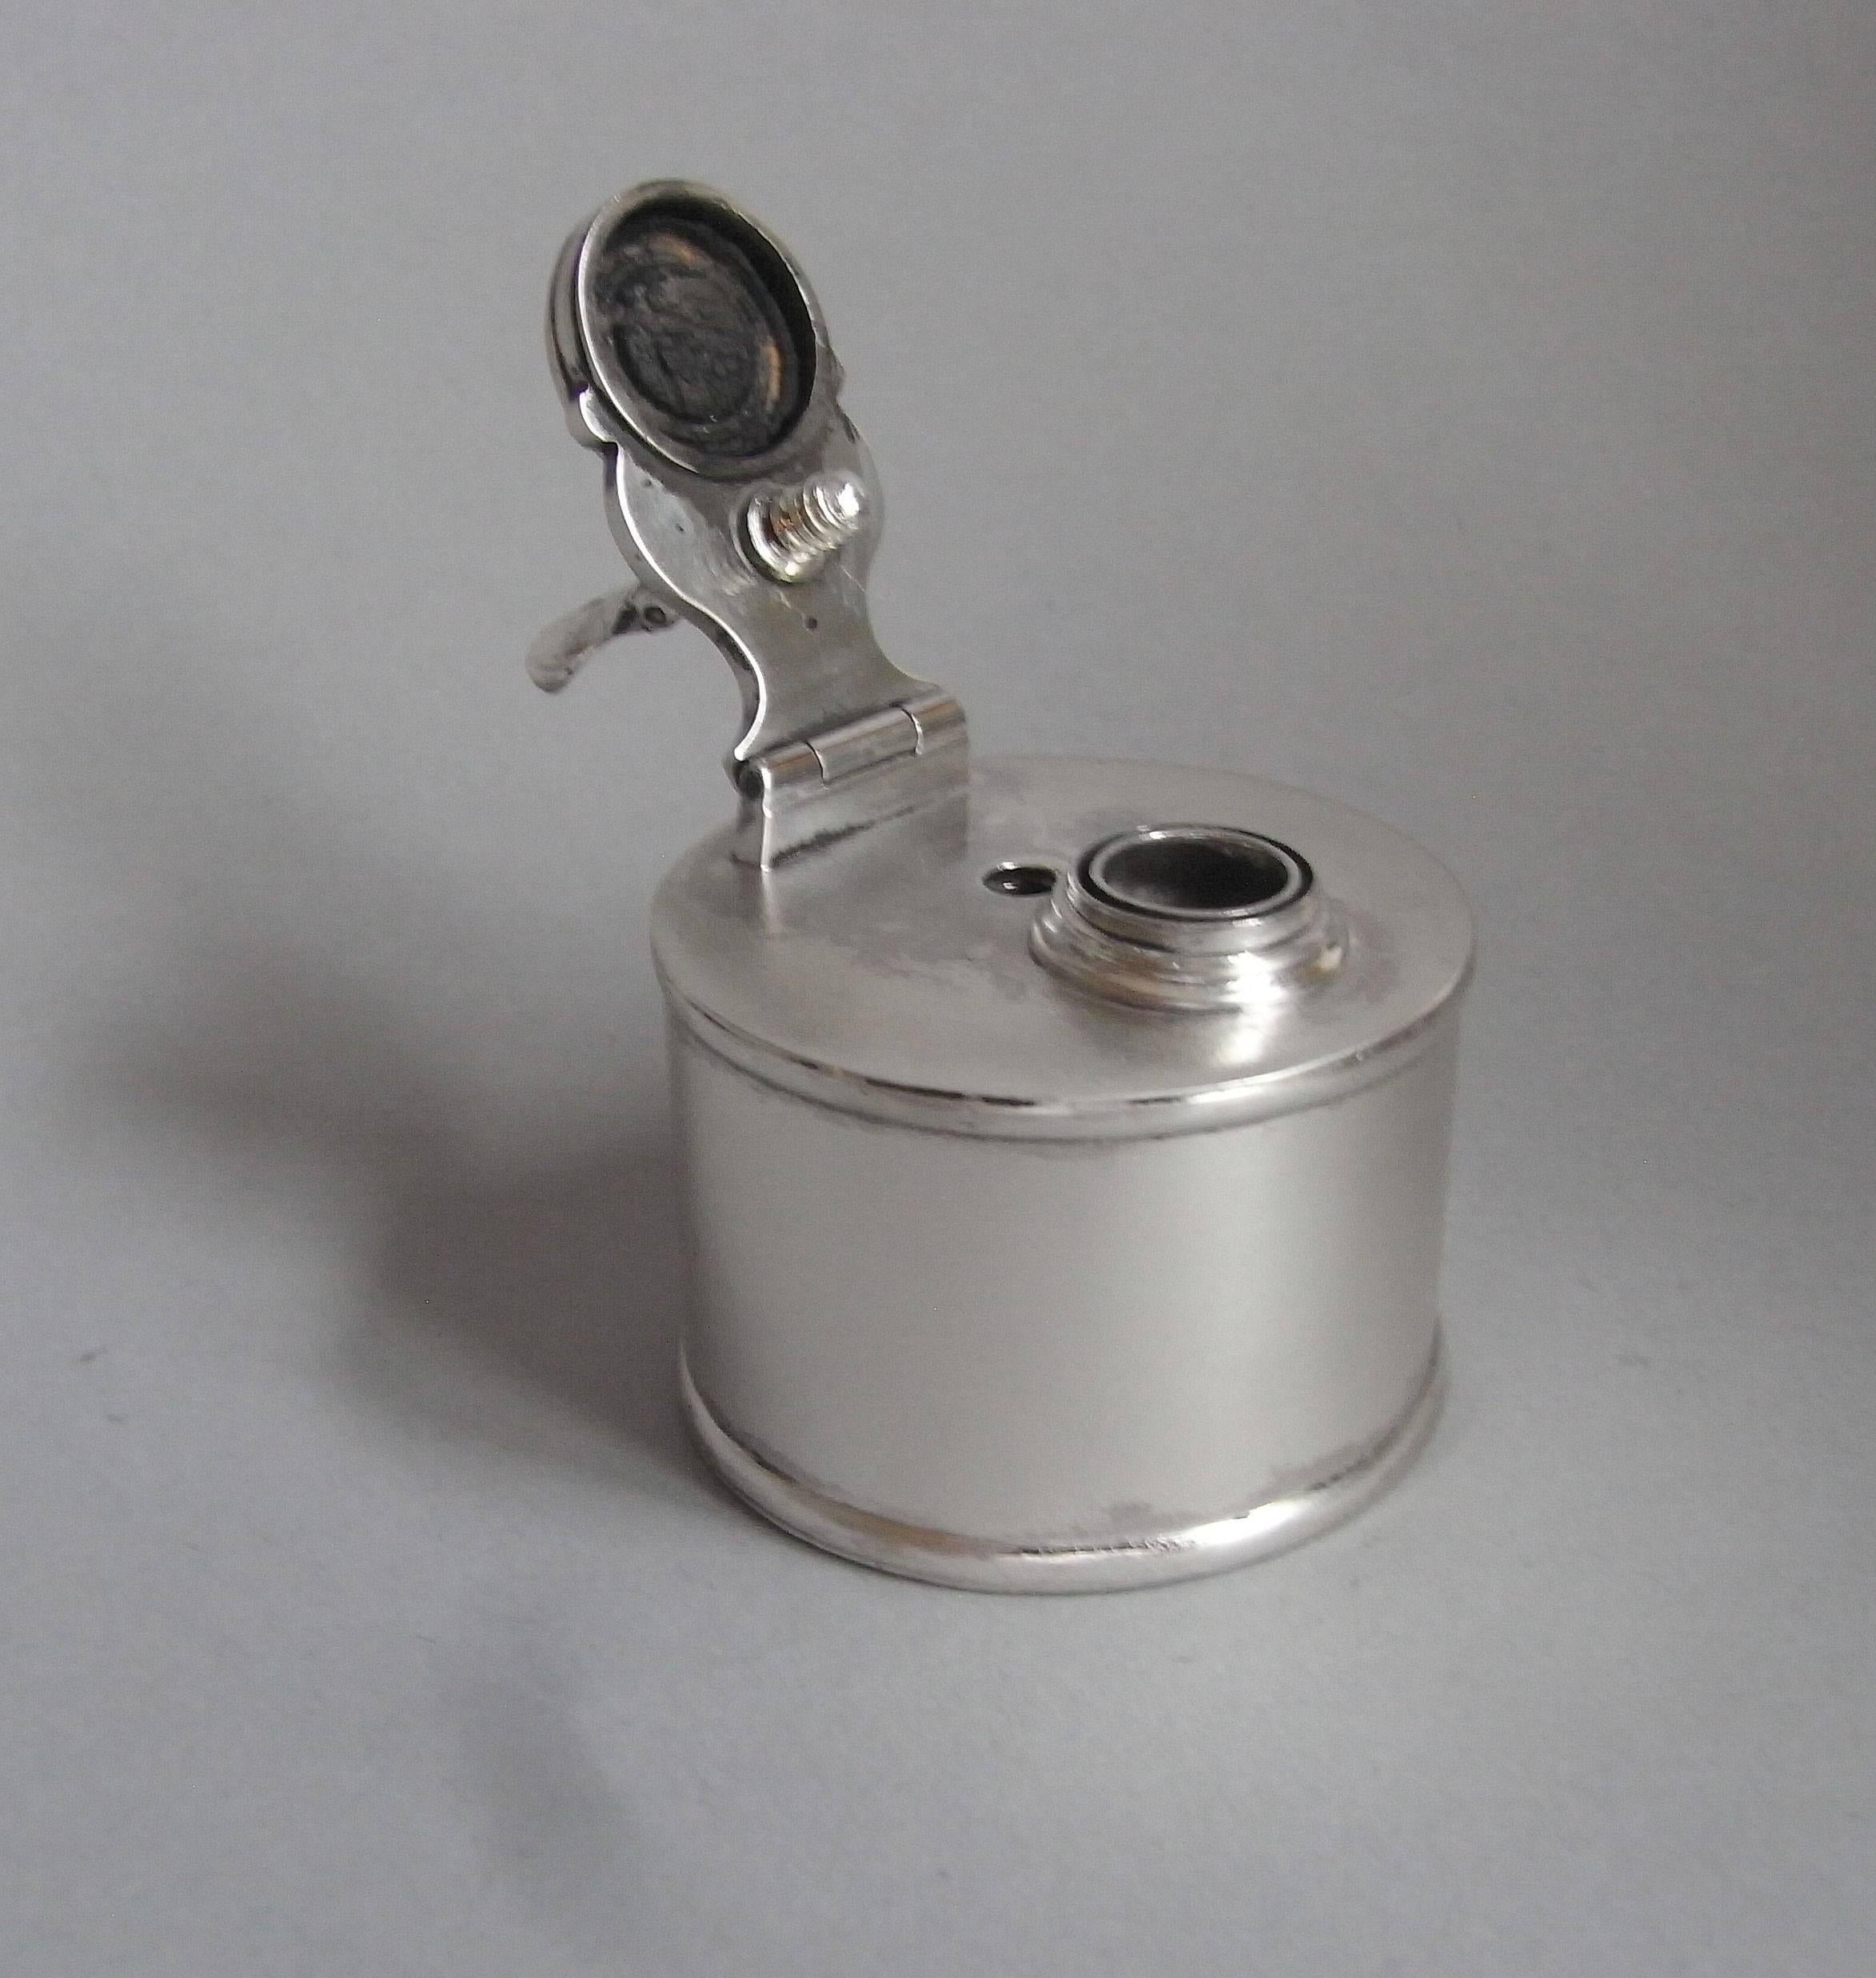 The inkwell is, unusually, entirely made of silver and is modelled in the 